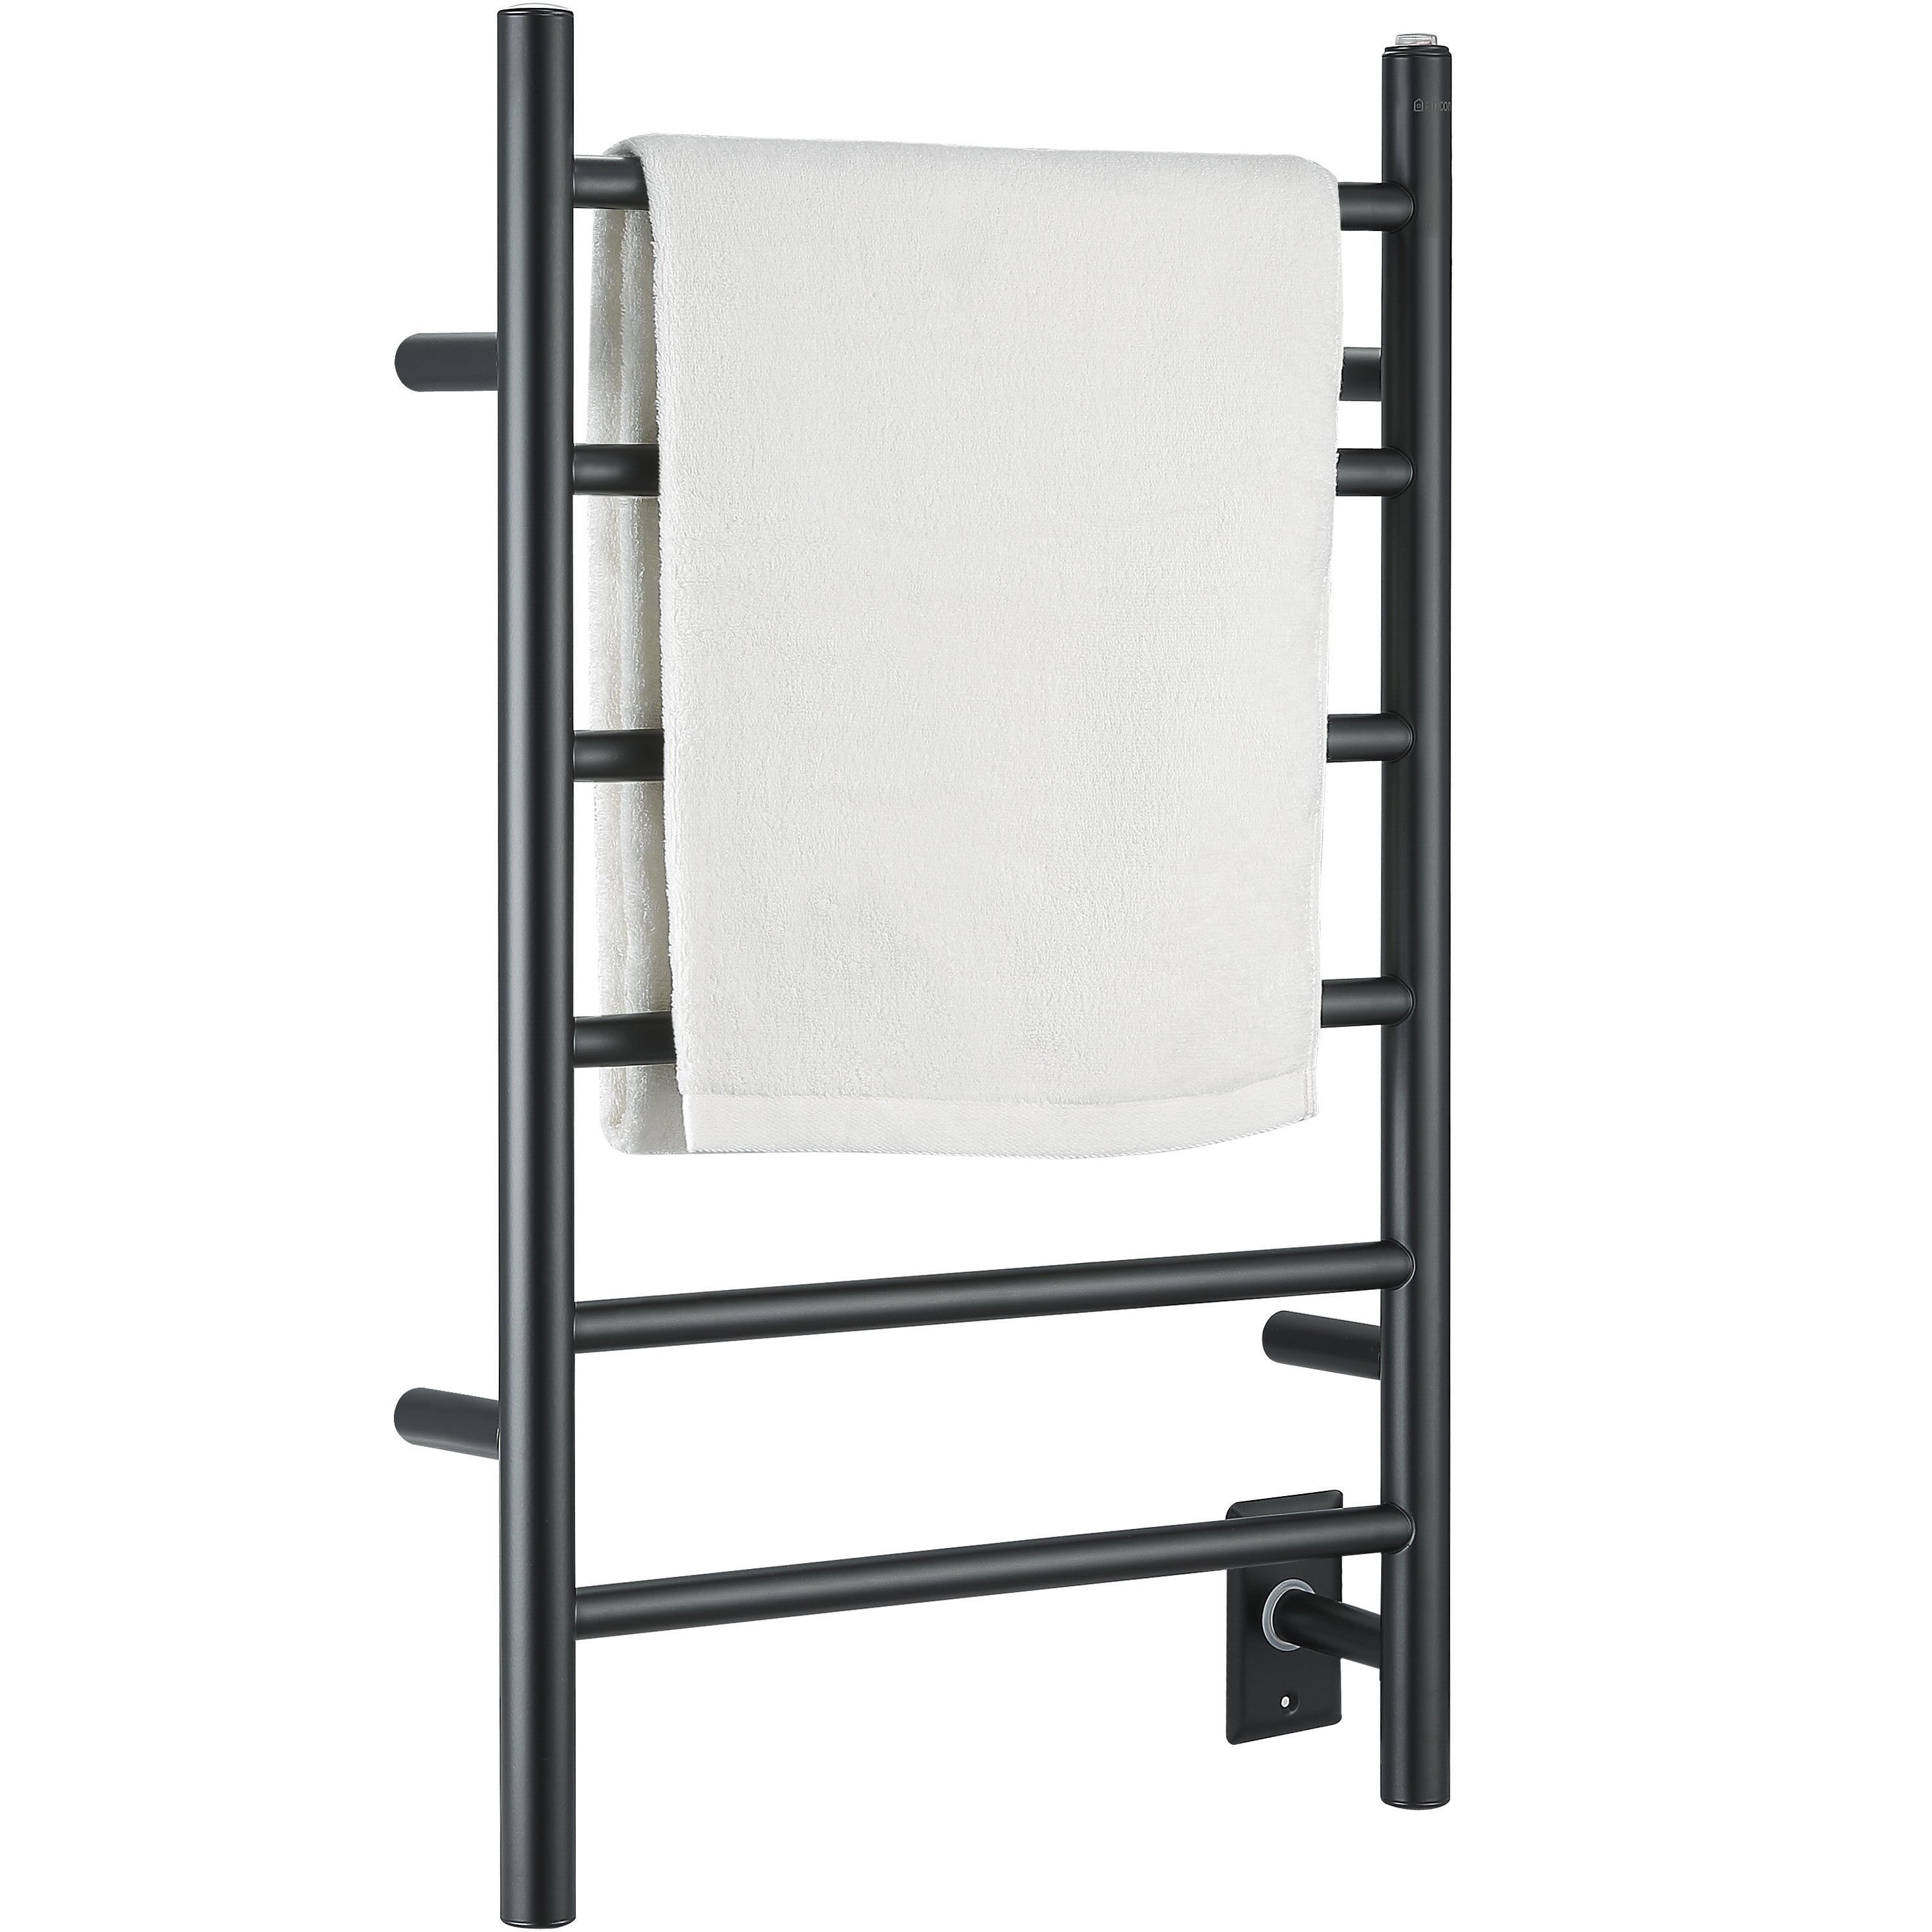 Ancona Comfort 6 Wall Mount Plug-In and Hardwire Towel Warmer in Matte Black